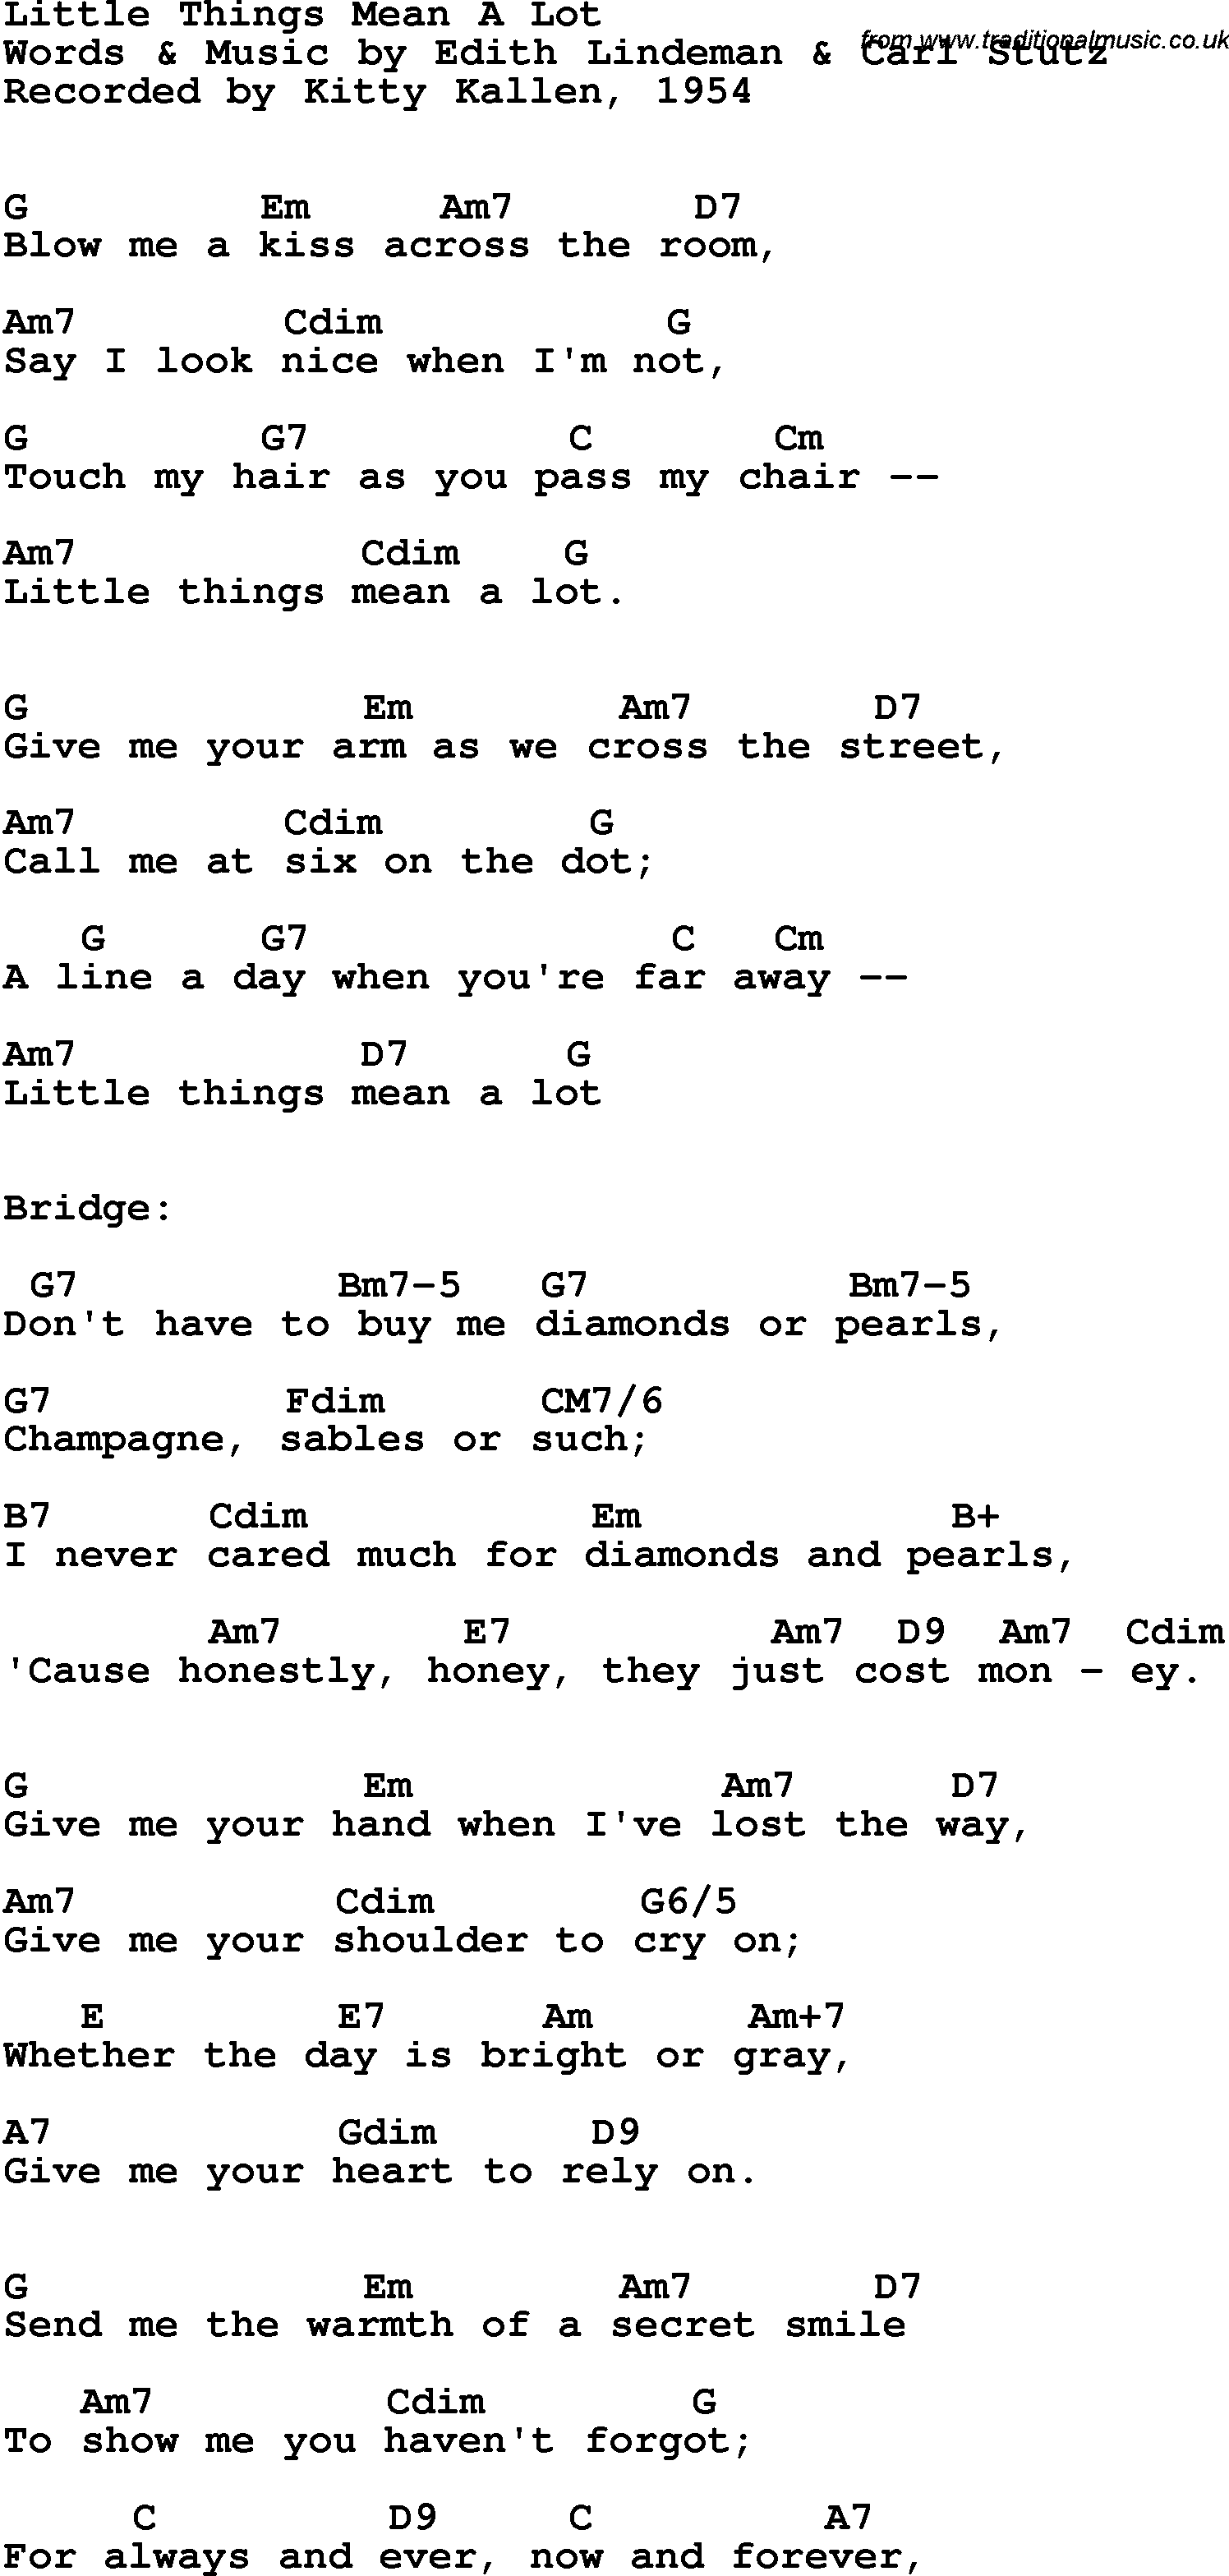 Song Lyrics with guitar chords for Little Things Mean A Lot- Kitty Kallen 1954